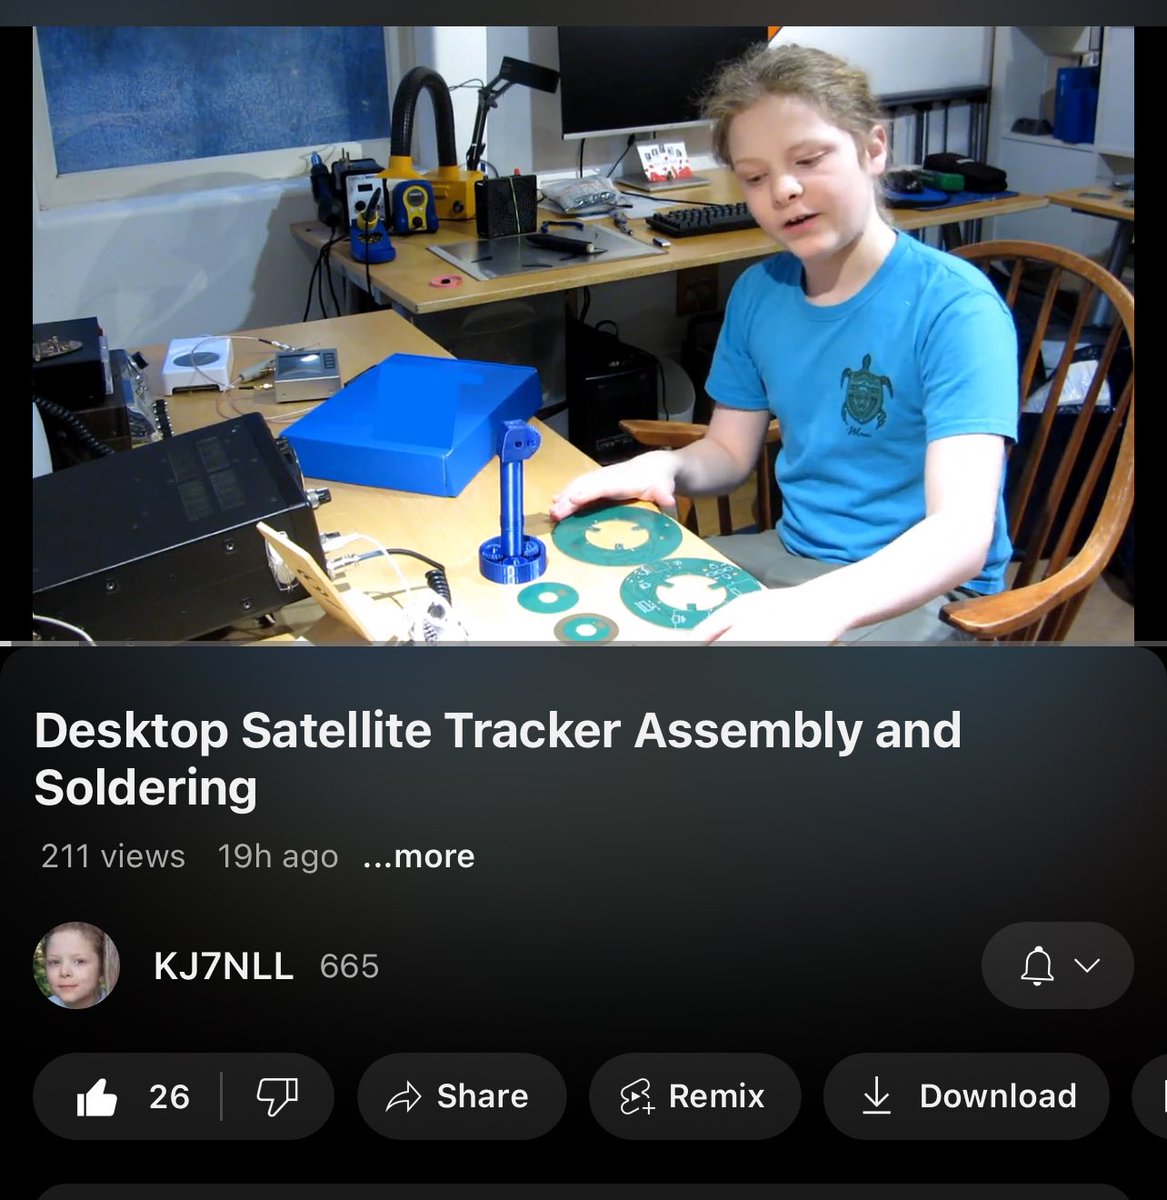 This is cool and has so few views. Share this around! Kid is building a desktop satellite tracker. Link below.